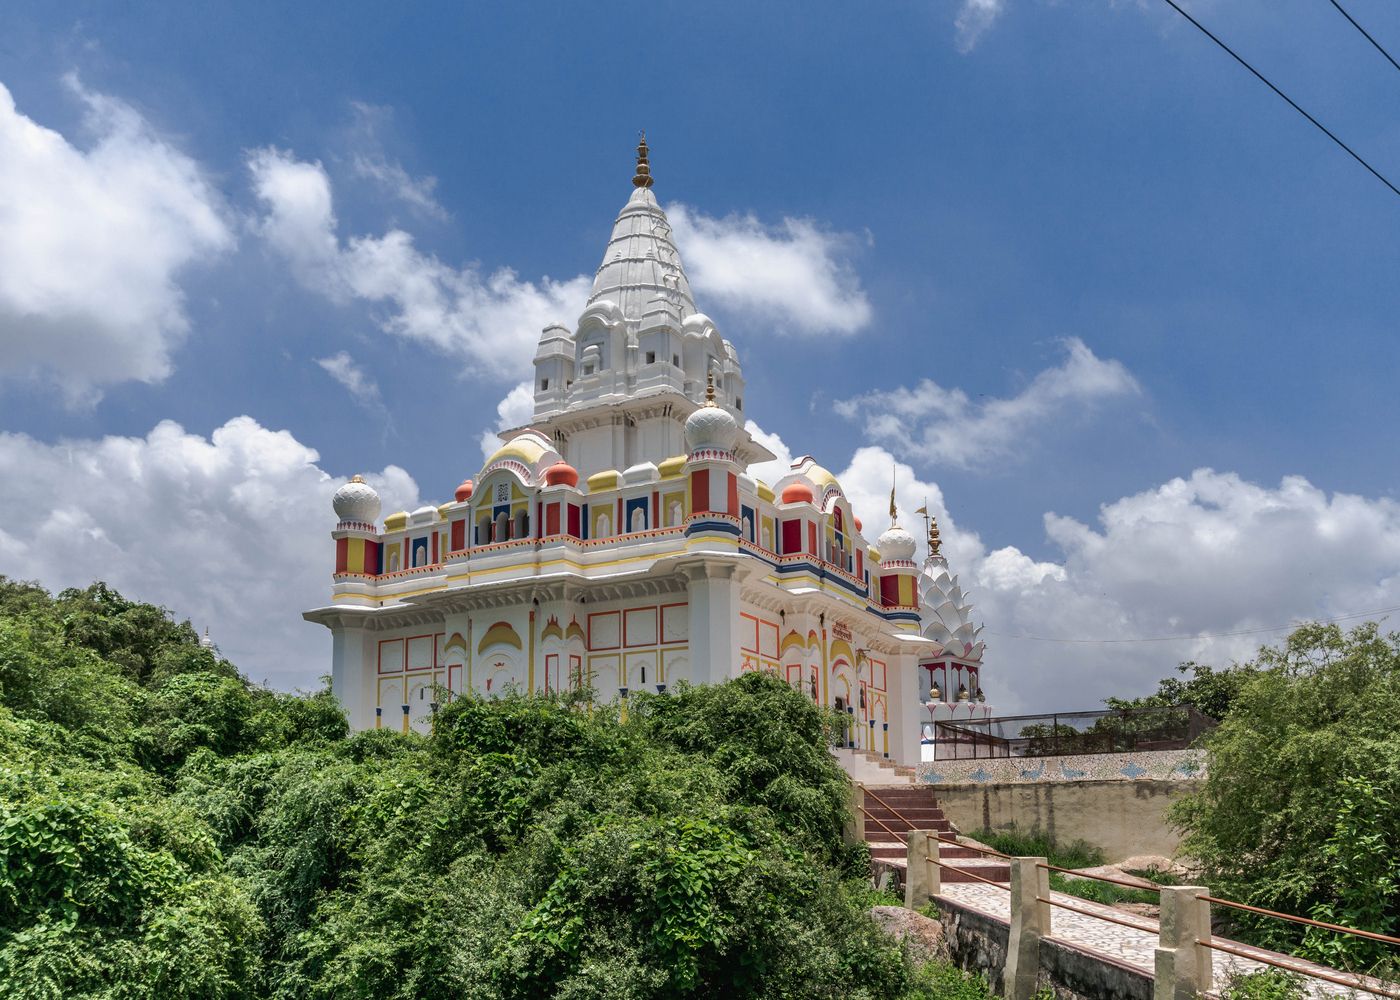 The side view of a majestic Jain temple, with high spires and hanging balconies, situated in Sonagiri 